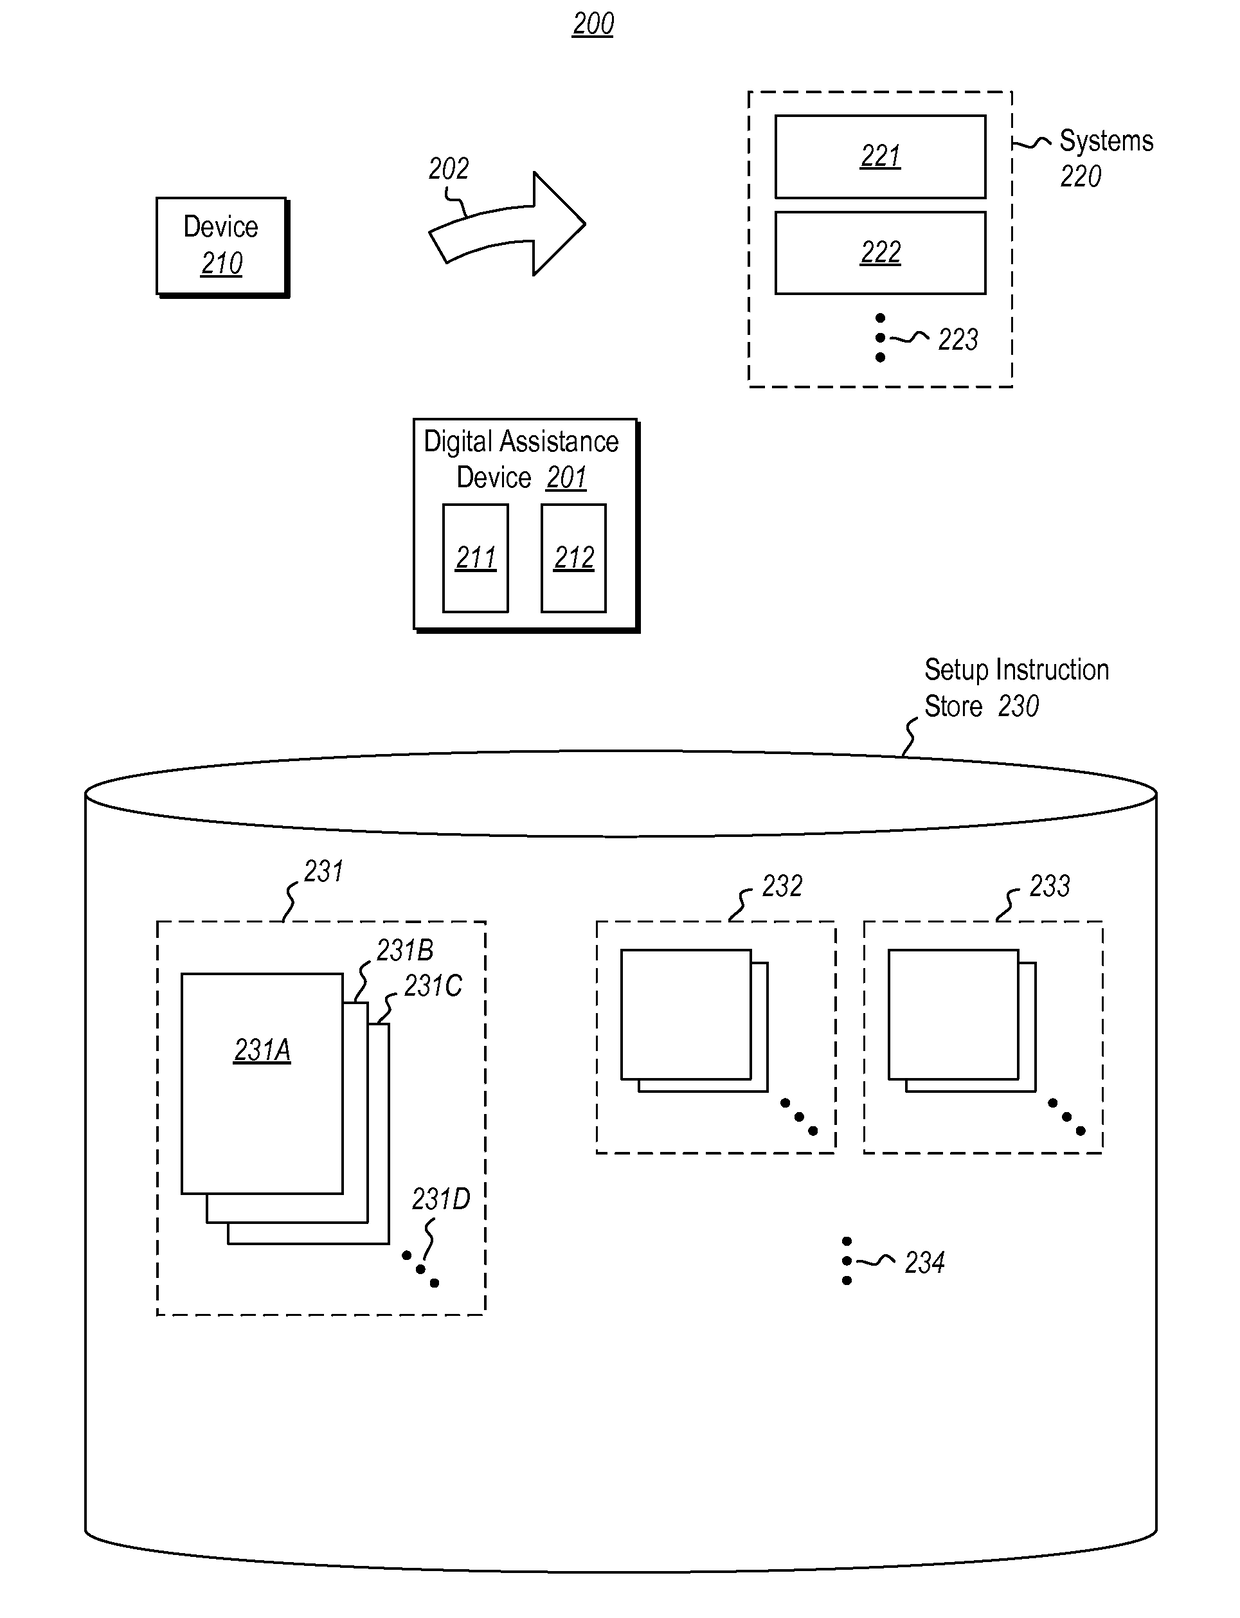 Digital assistant setting up device